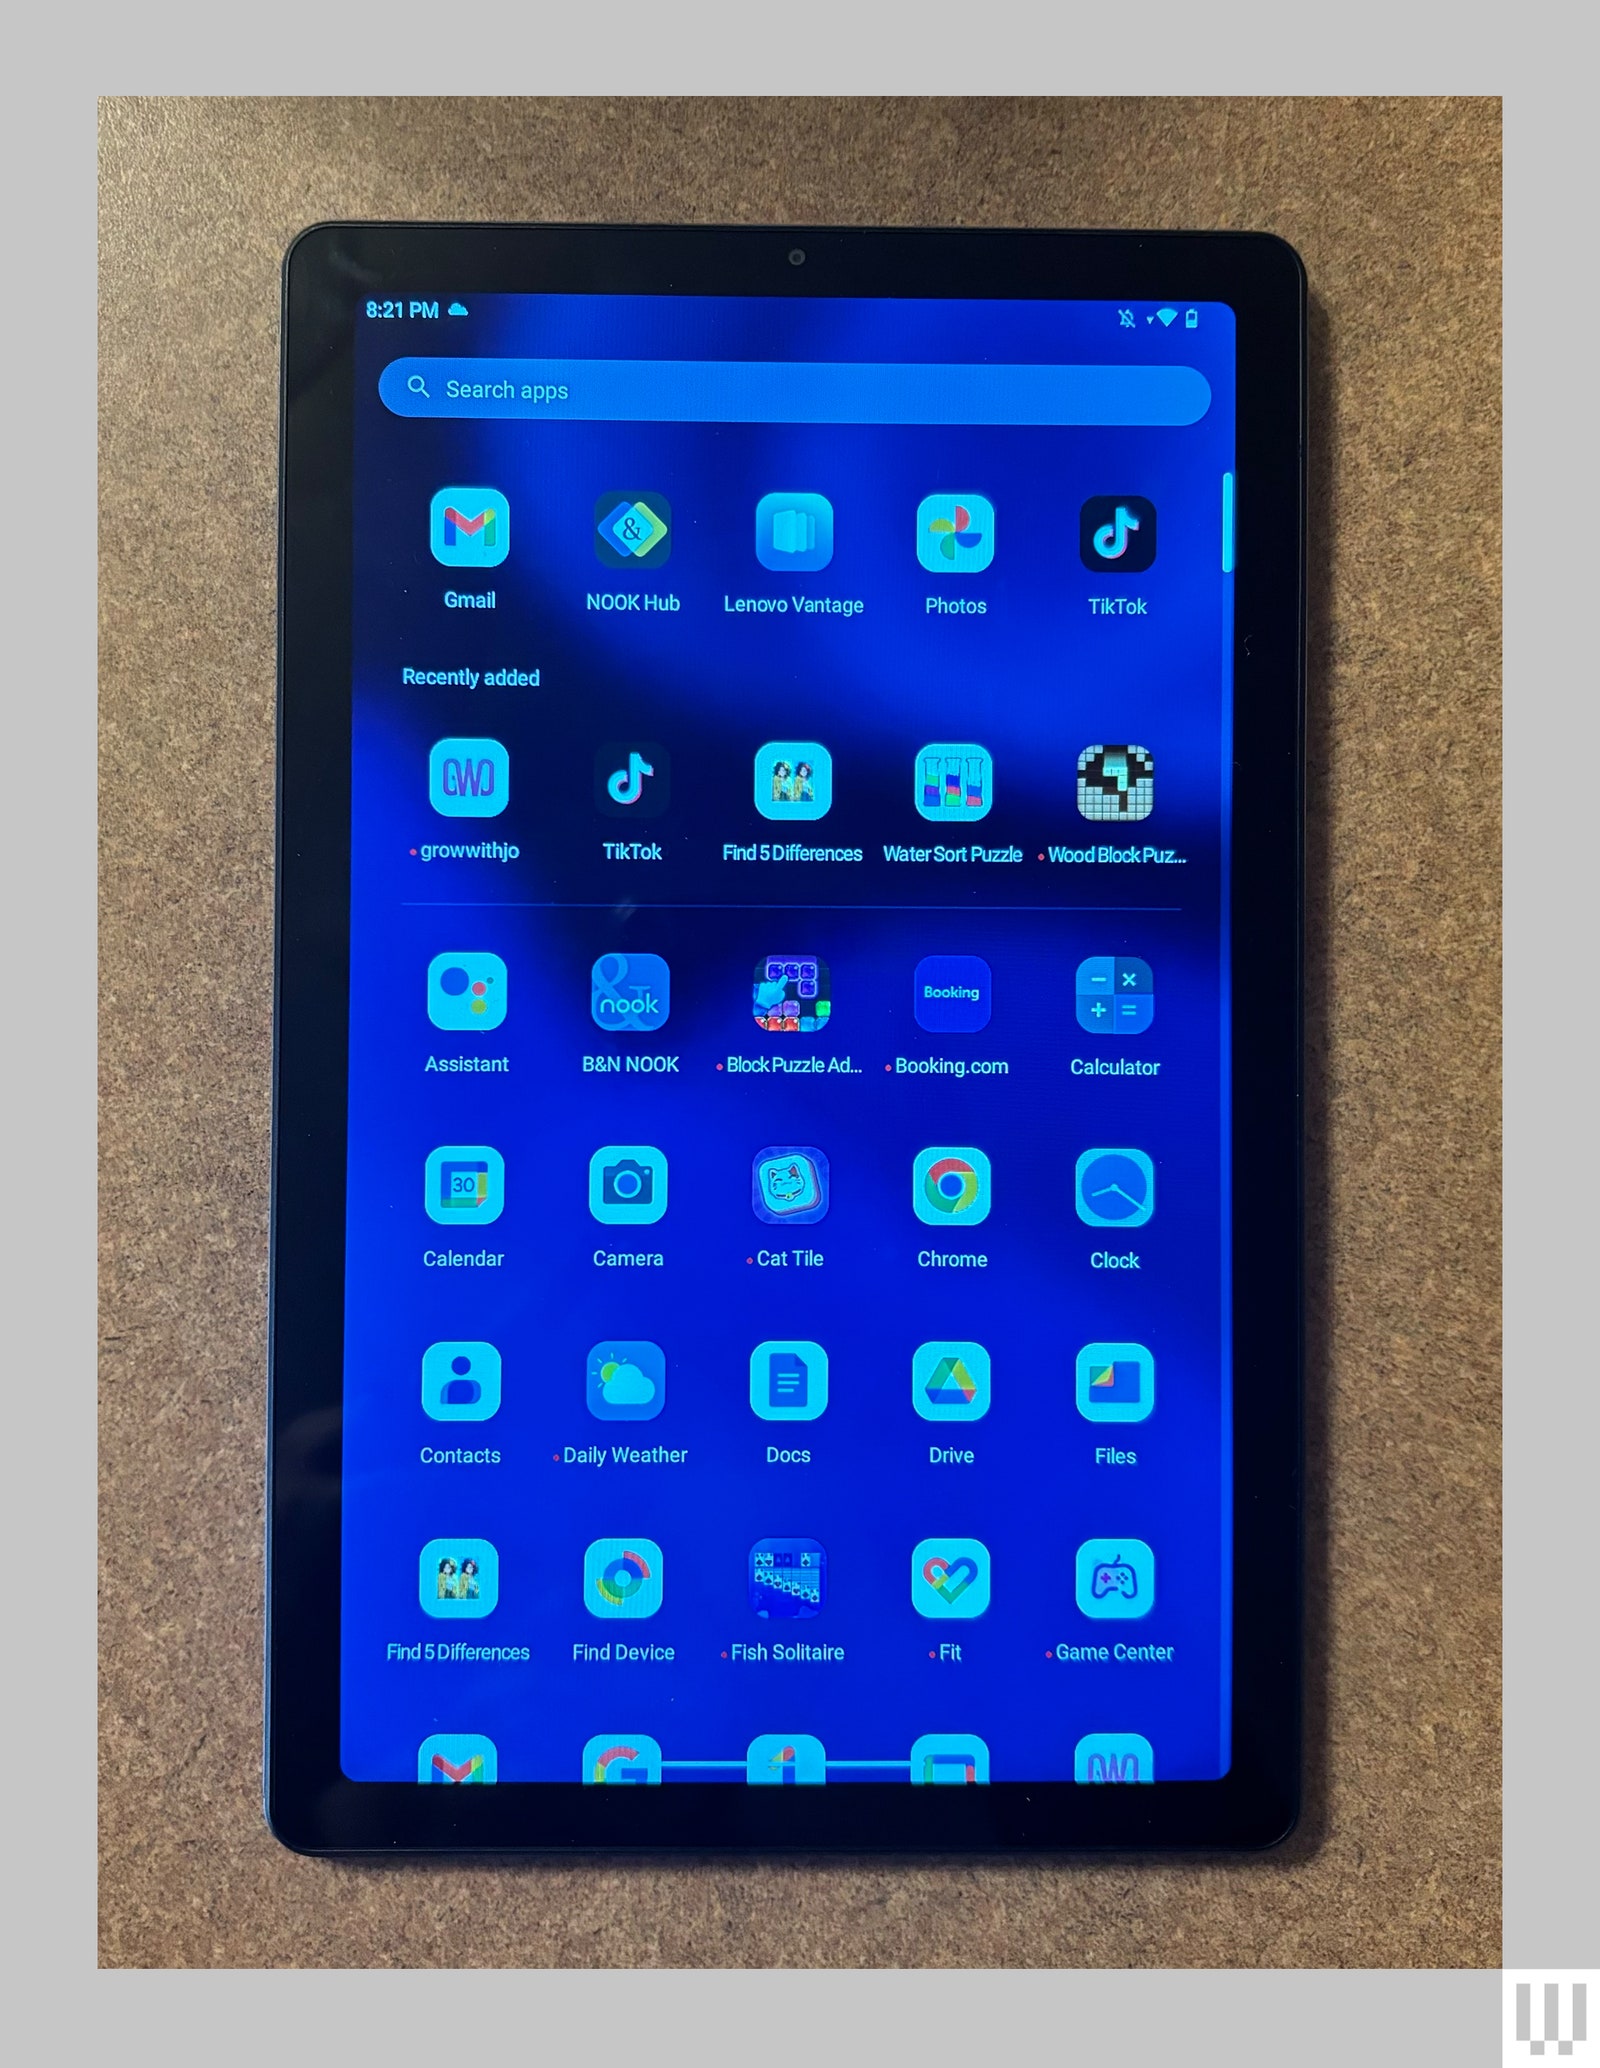 Tablet screen showing various app icons and a search bar